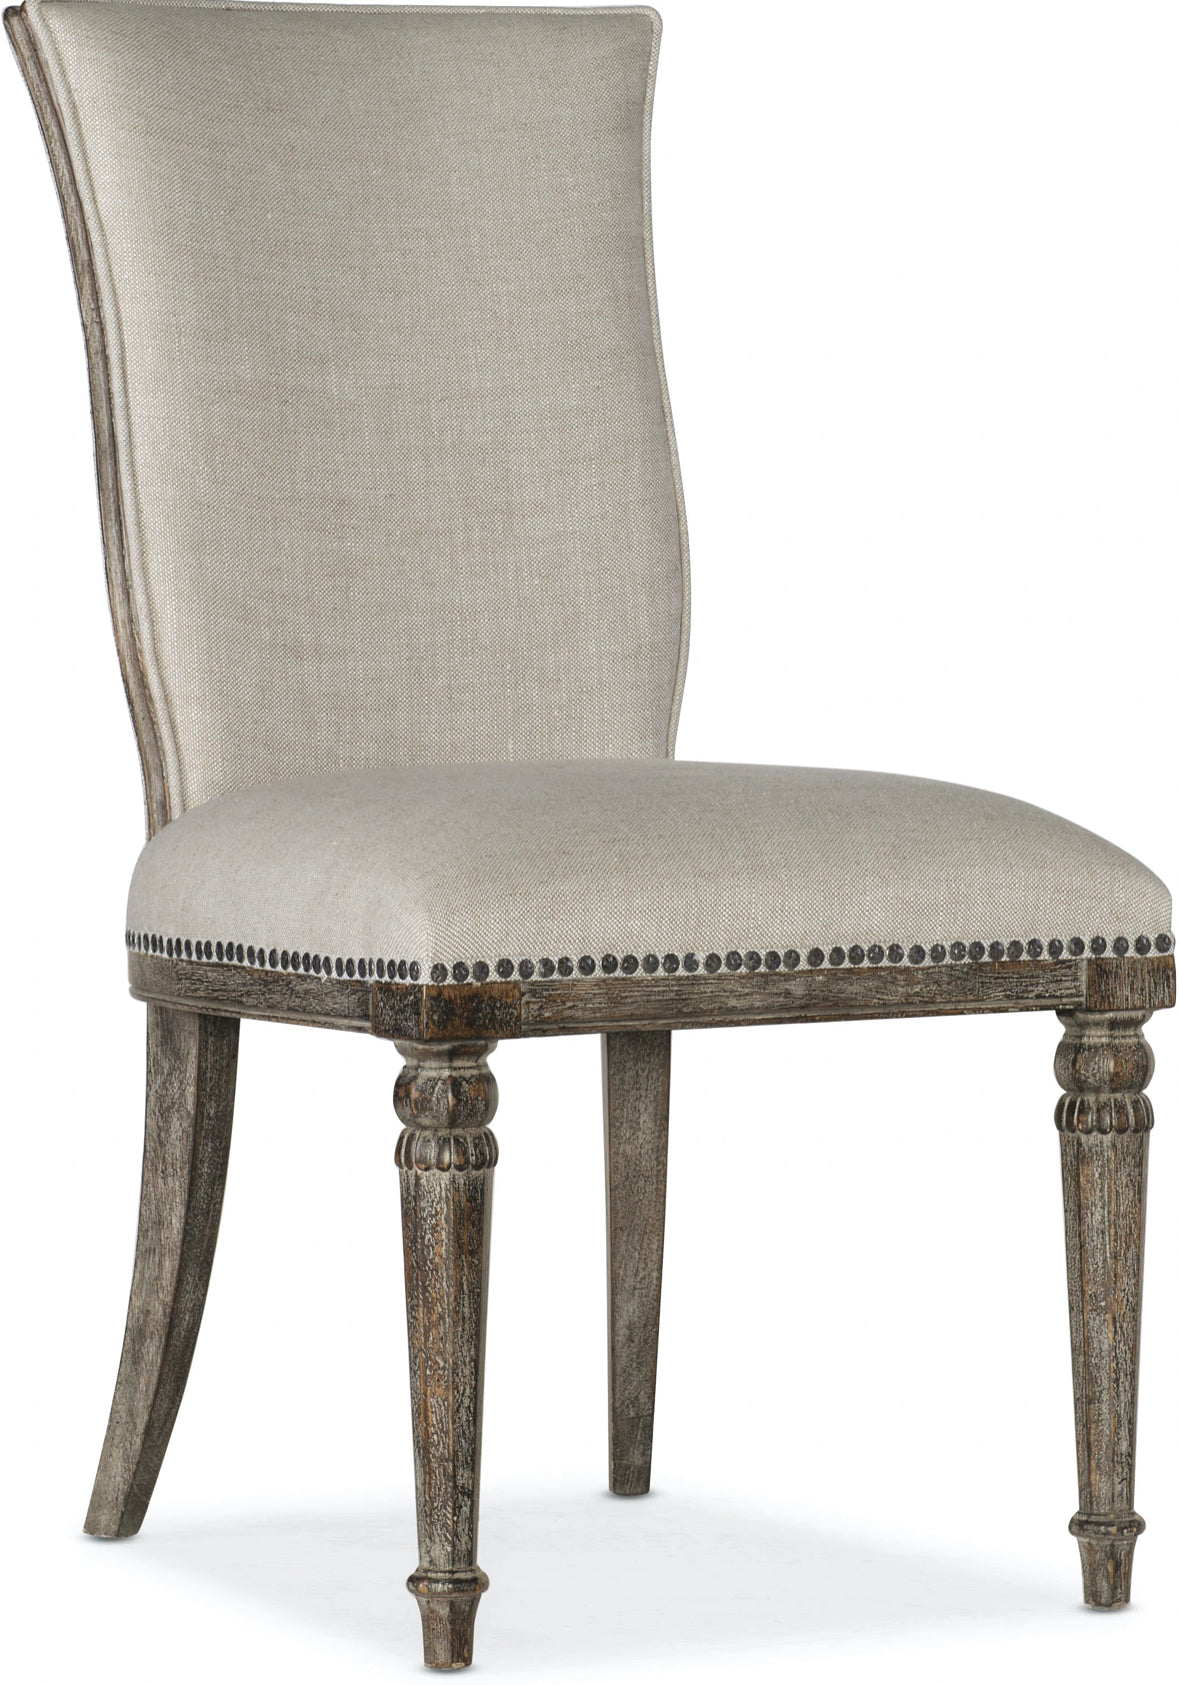 Vintage Chic Upholstered Chair (Set of 2)